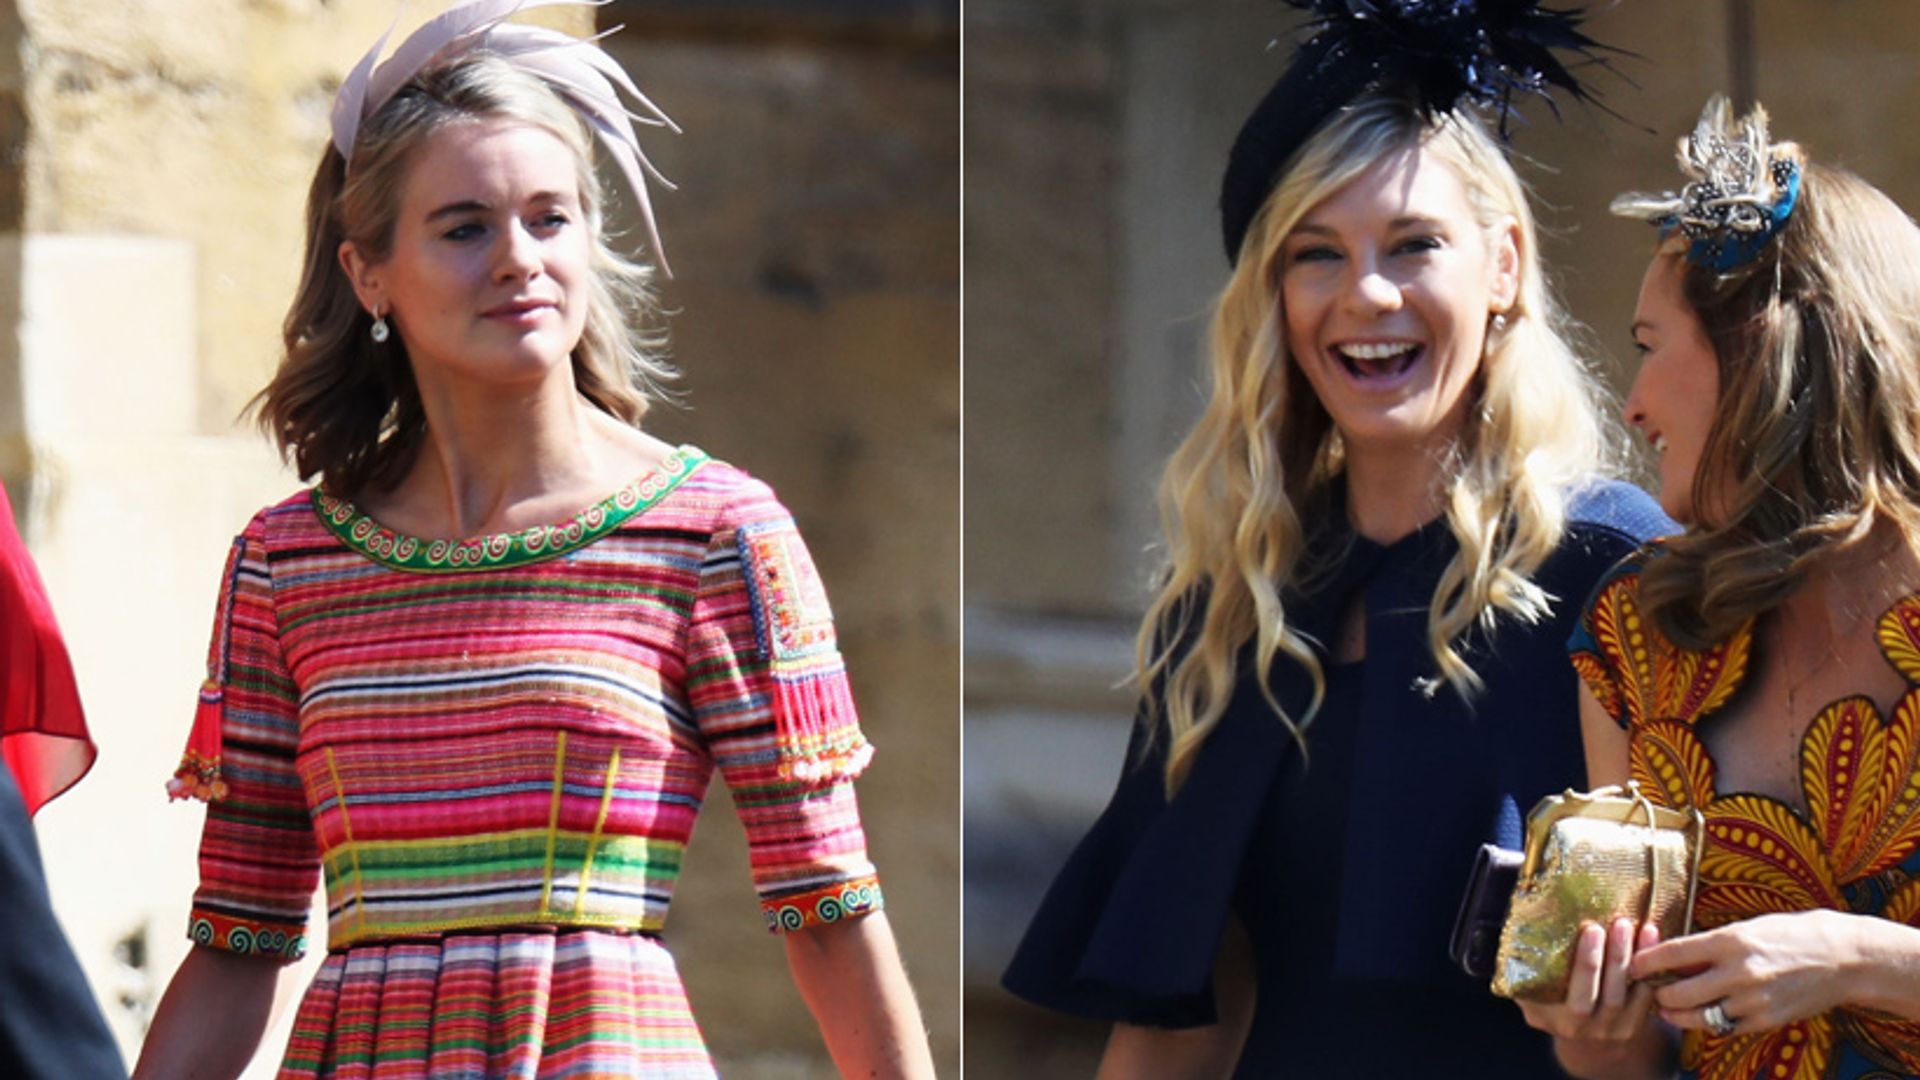 Prince Harry's ex-girlfriends Cressida Bonas and Chelsy Davy arrive for royal wedding